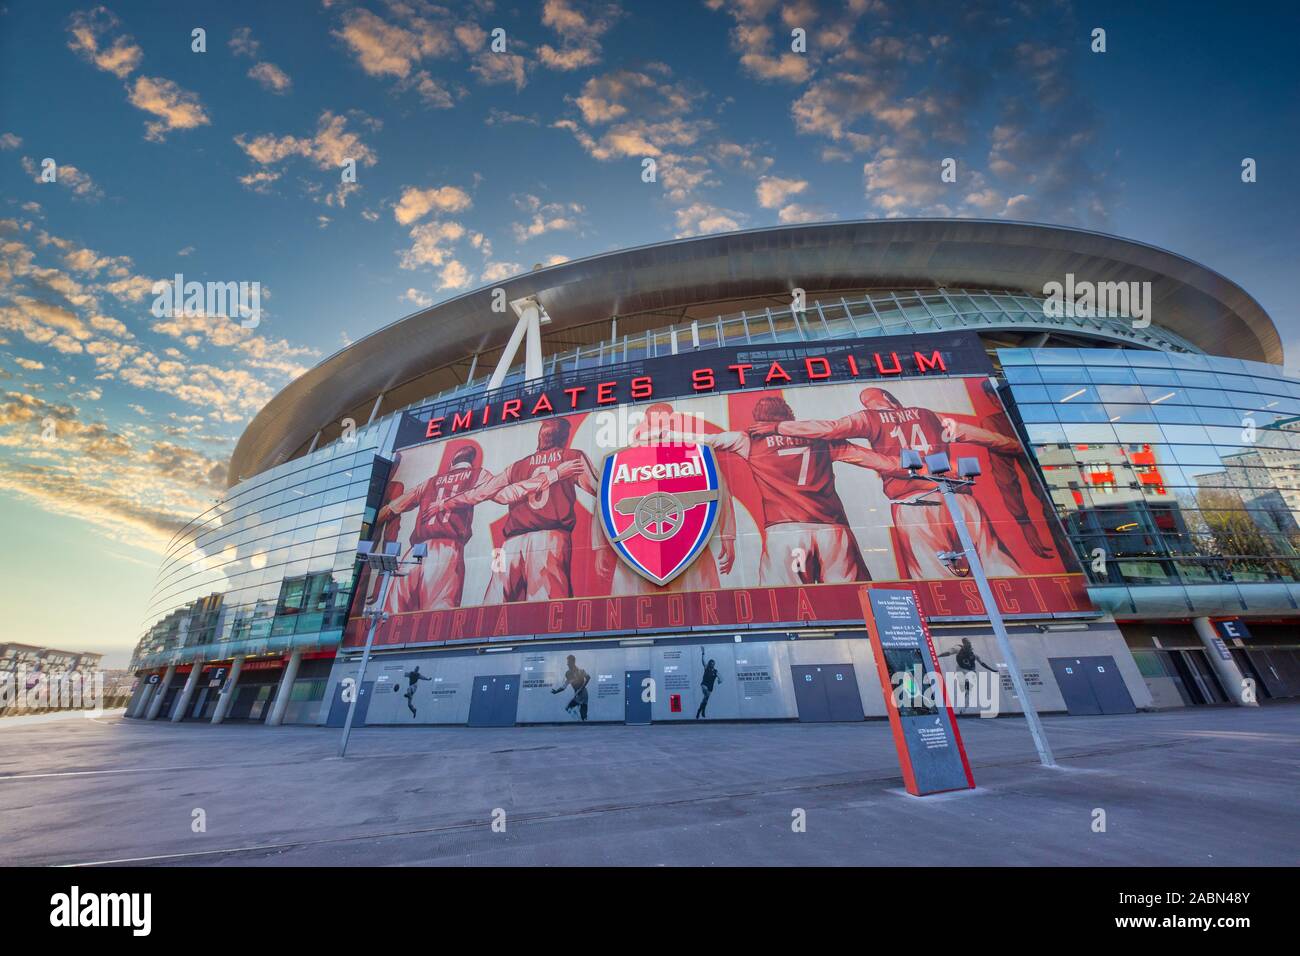 LONDON/ENGLAND - 01 February, 2018 :  Visiting In front of the Emirates Stadium in London, UK showing the Arsenal armoury or Arsenal shop and ticket s Stock Photo